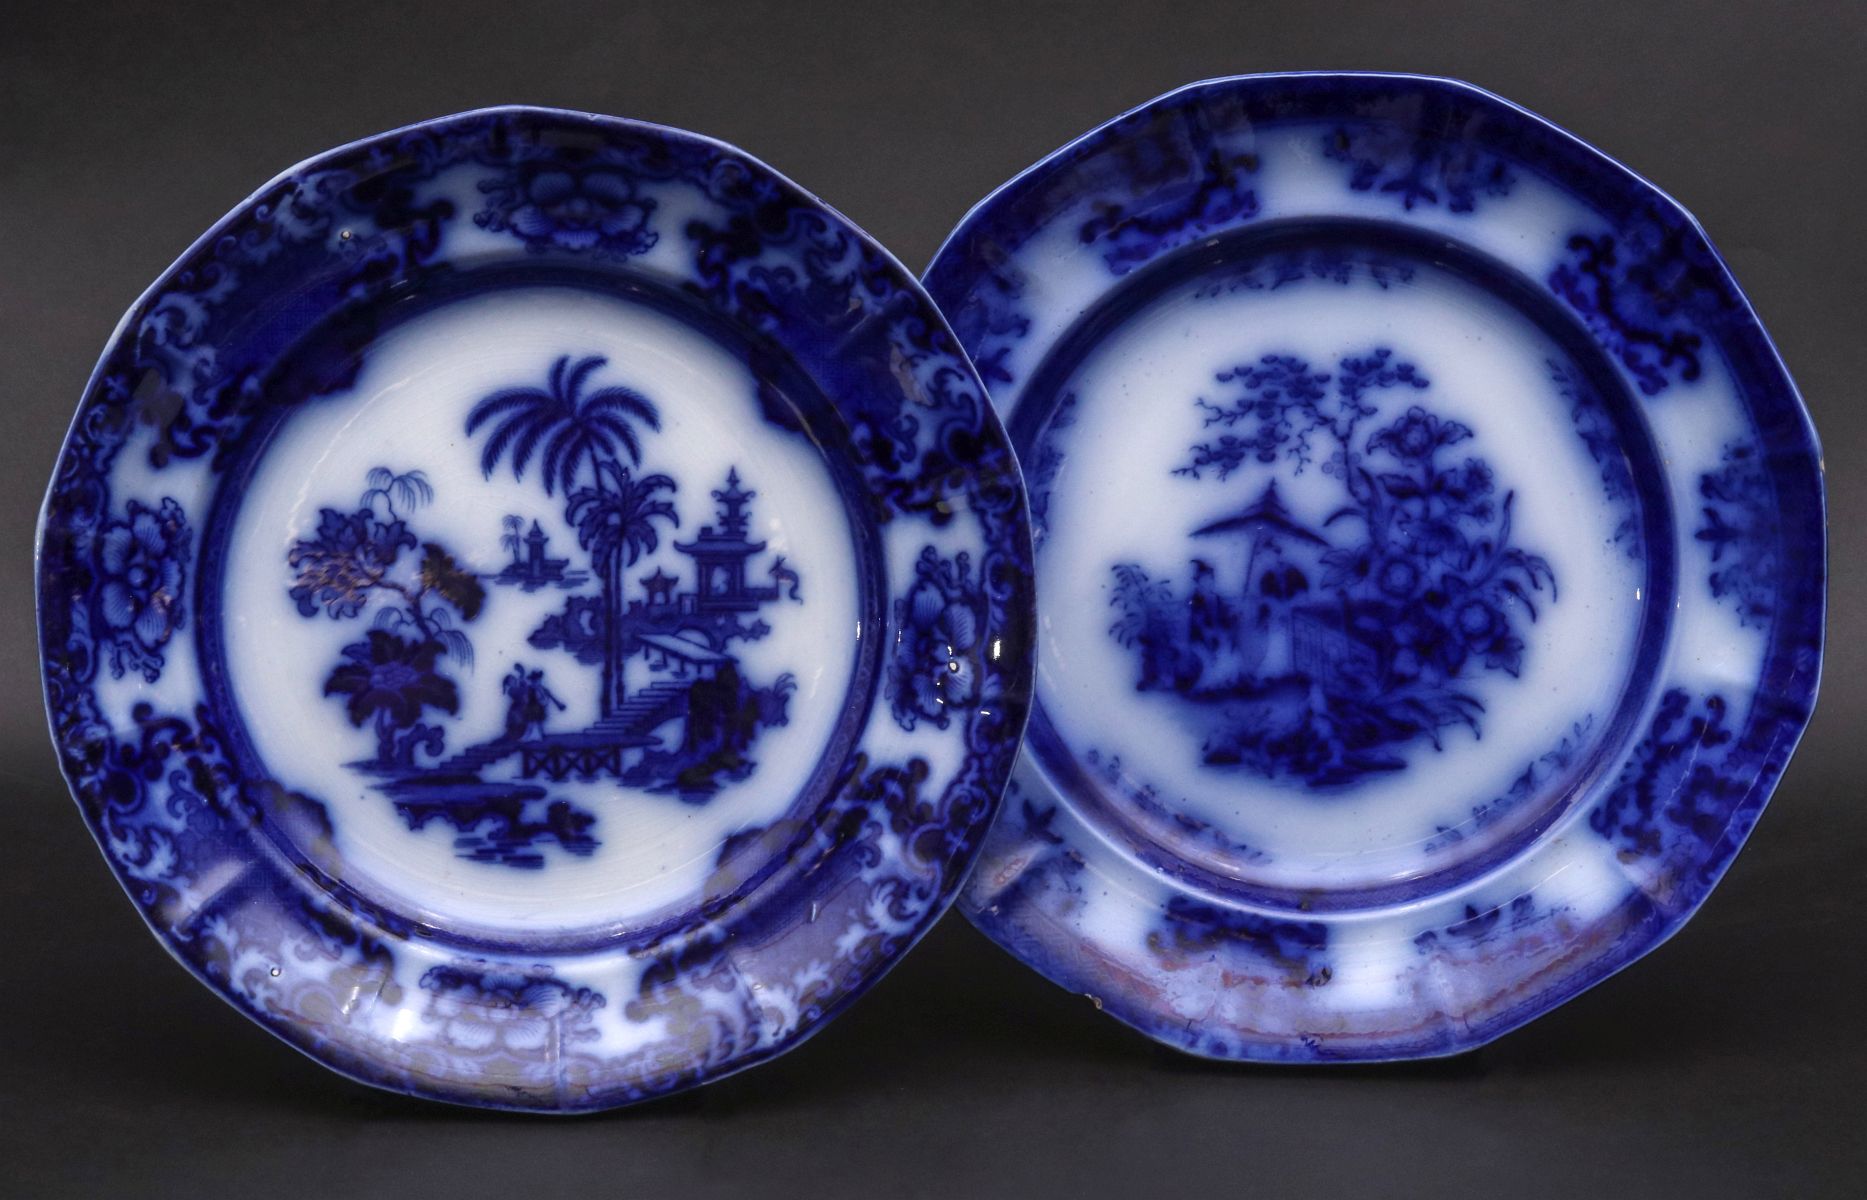 FLOW BLUE PLATES IN AMOY AND SHAPOO PATTERNS